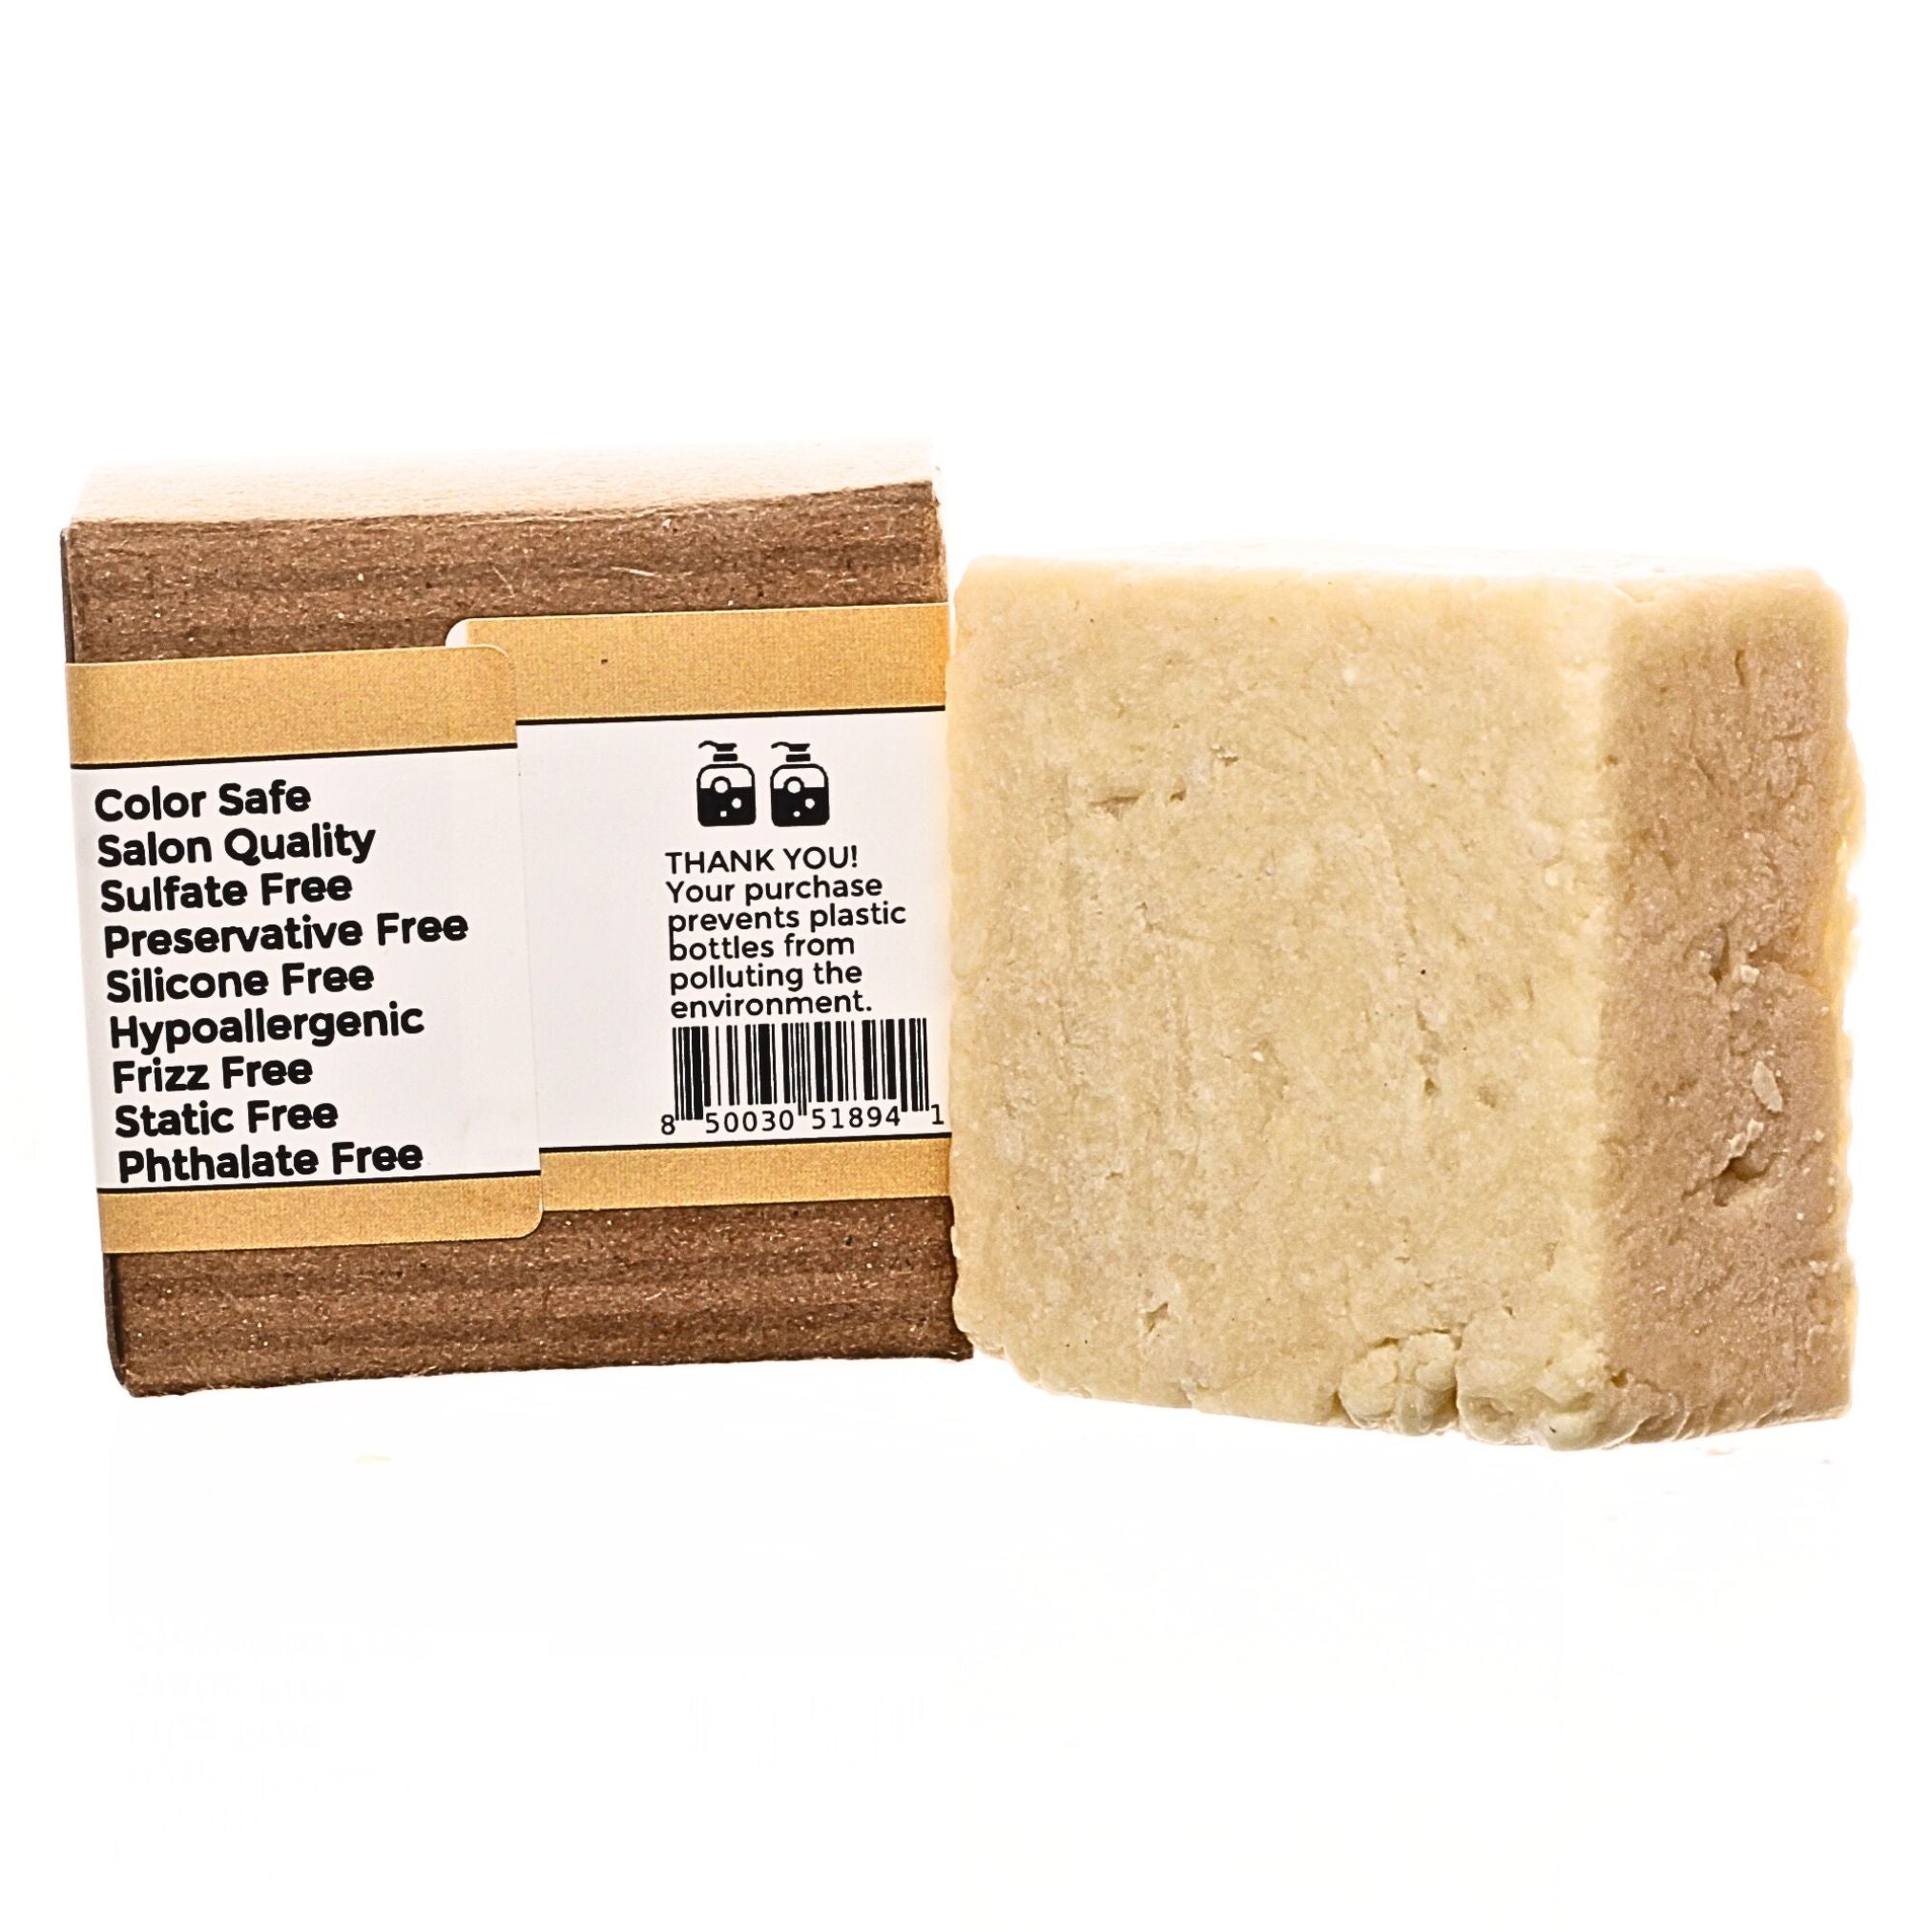 Farmbody Solid Shampoo Bars Save the Environment from Plastic Waste